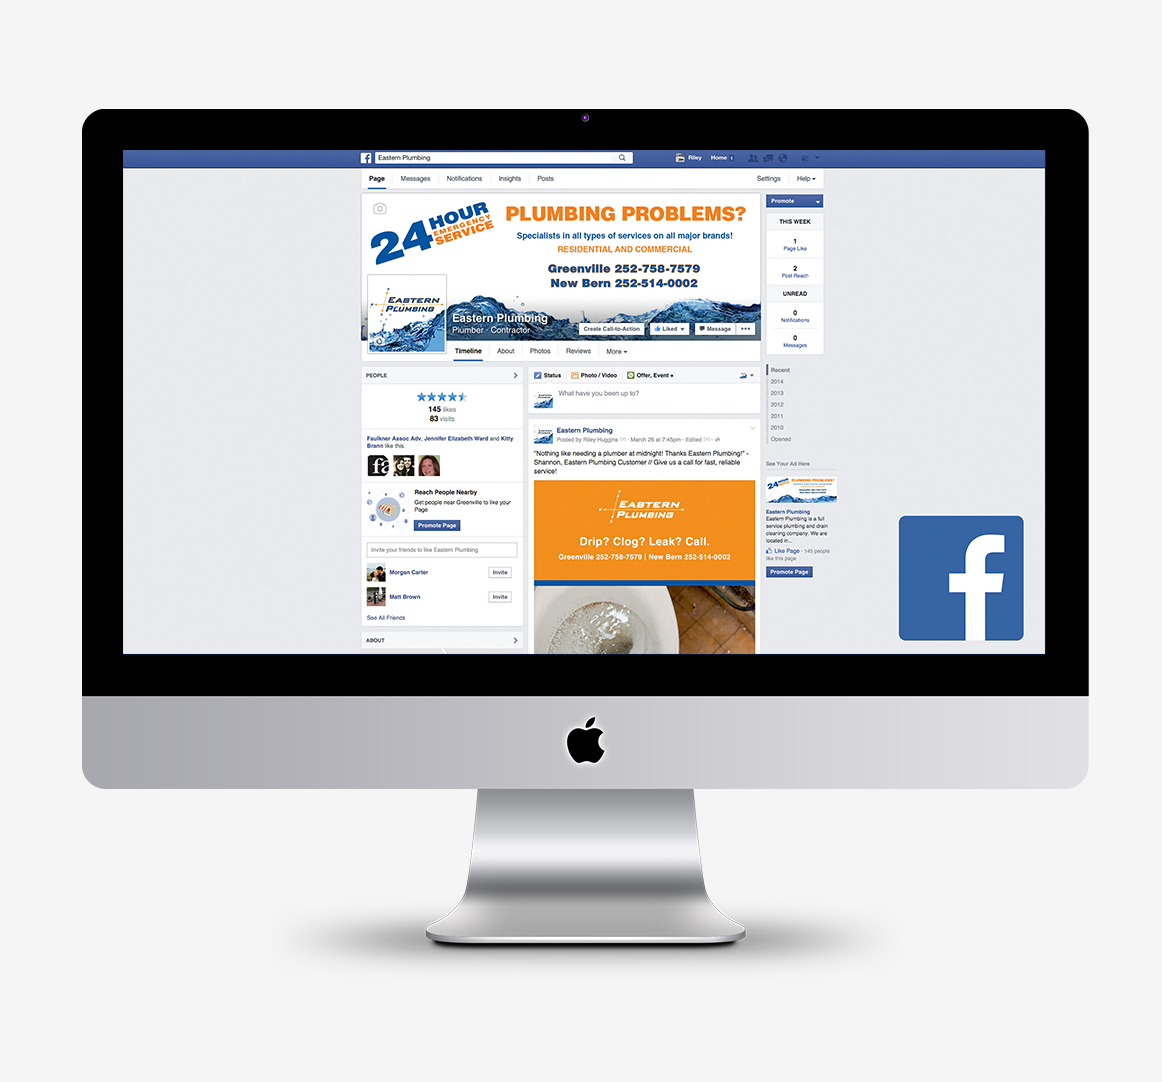 Eastern Plumbing Facebook page managed by Igoe Creative